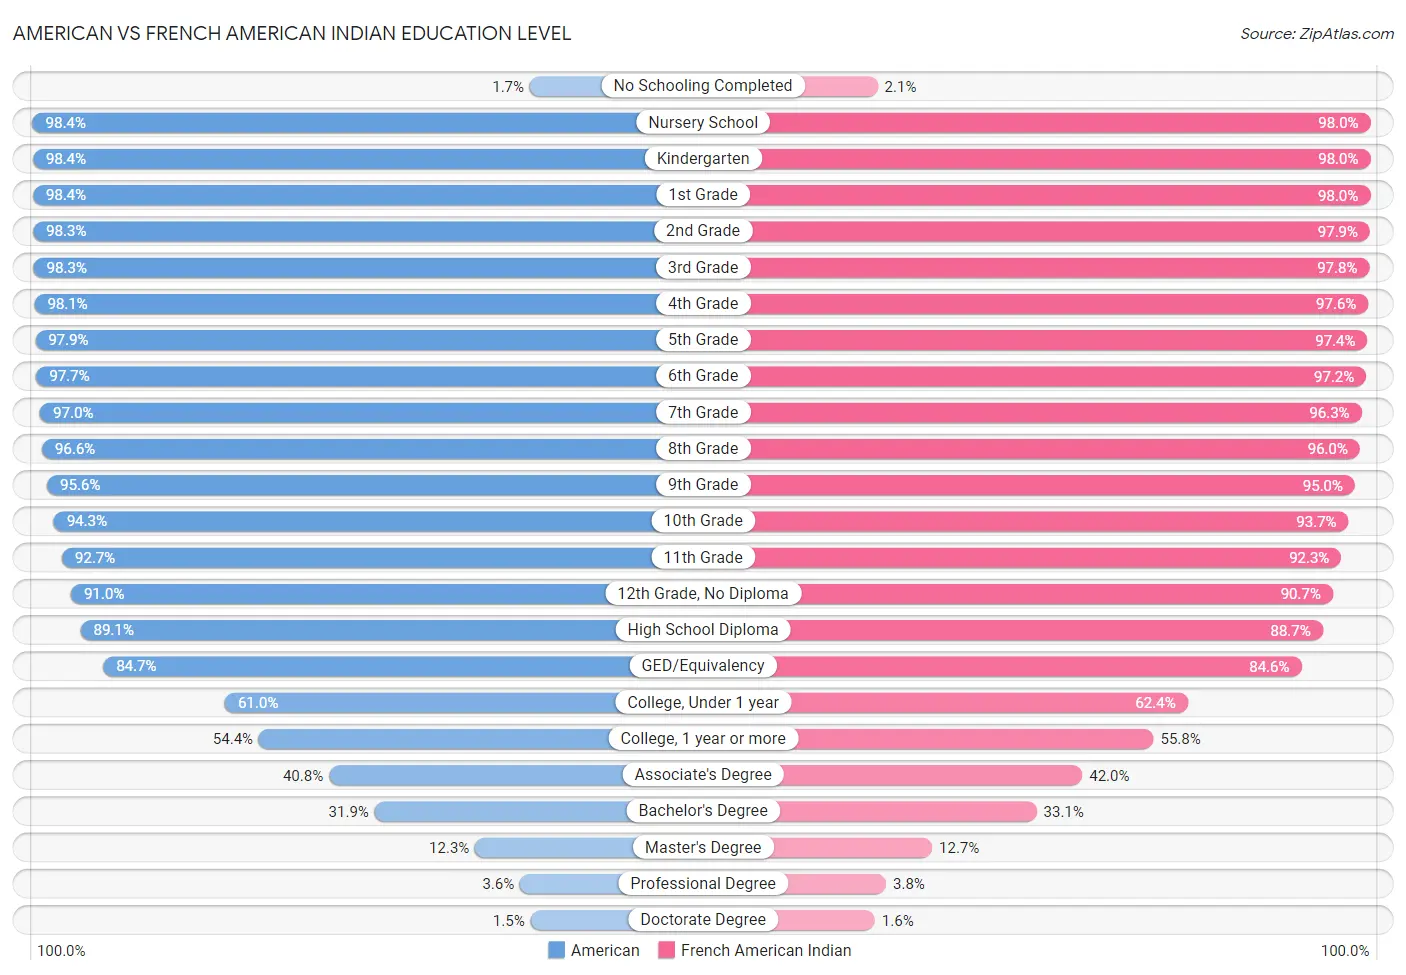 American vs French American Indian Education Level